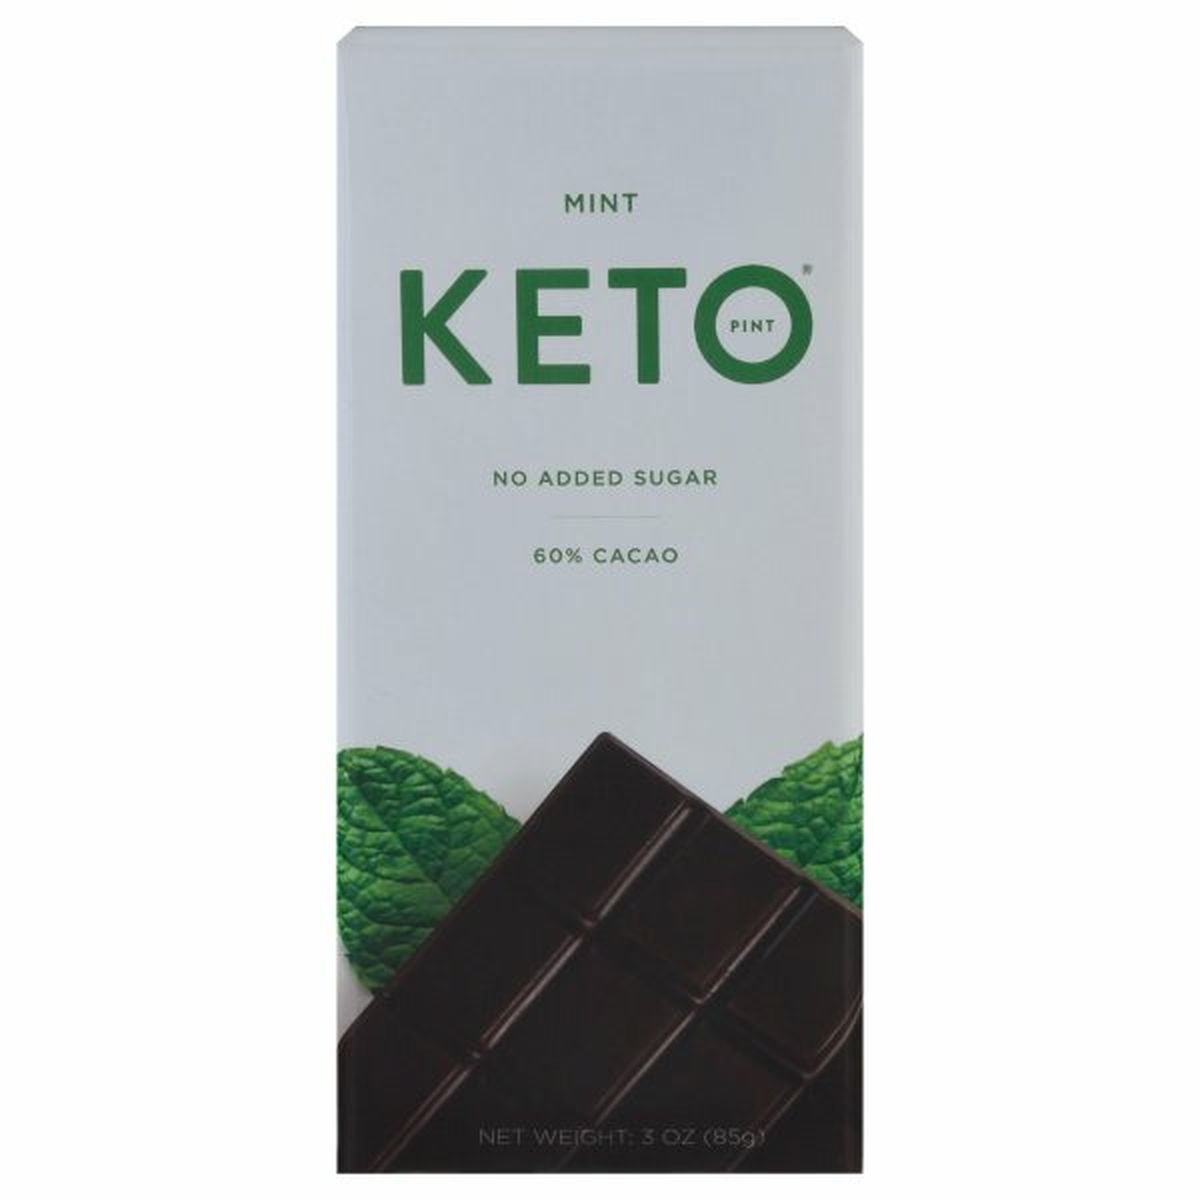 Calories in Keto Pint Chocolate, Mint, 60% Cacao